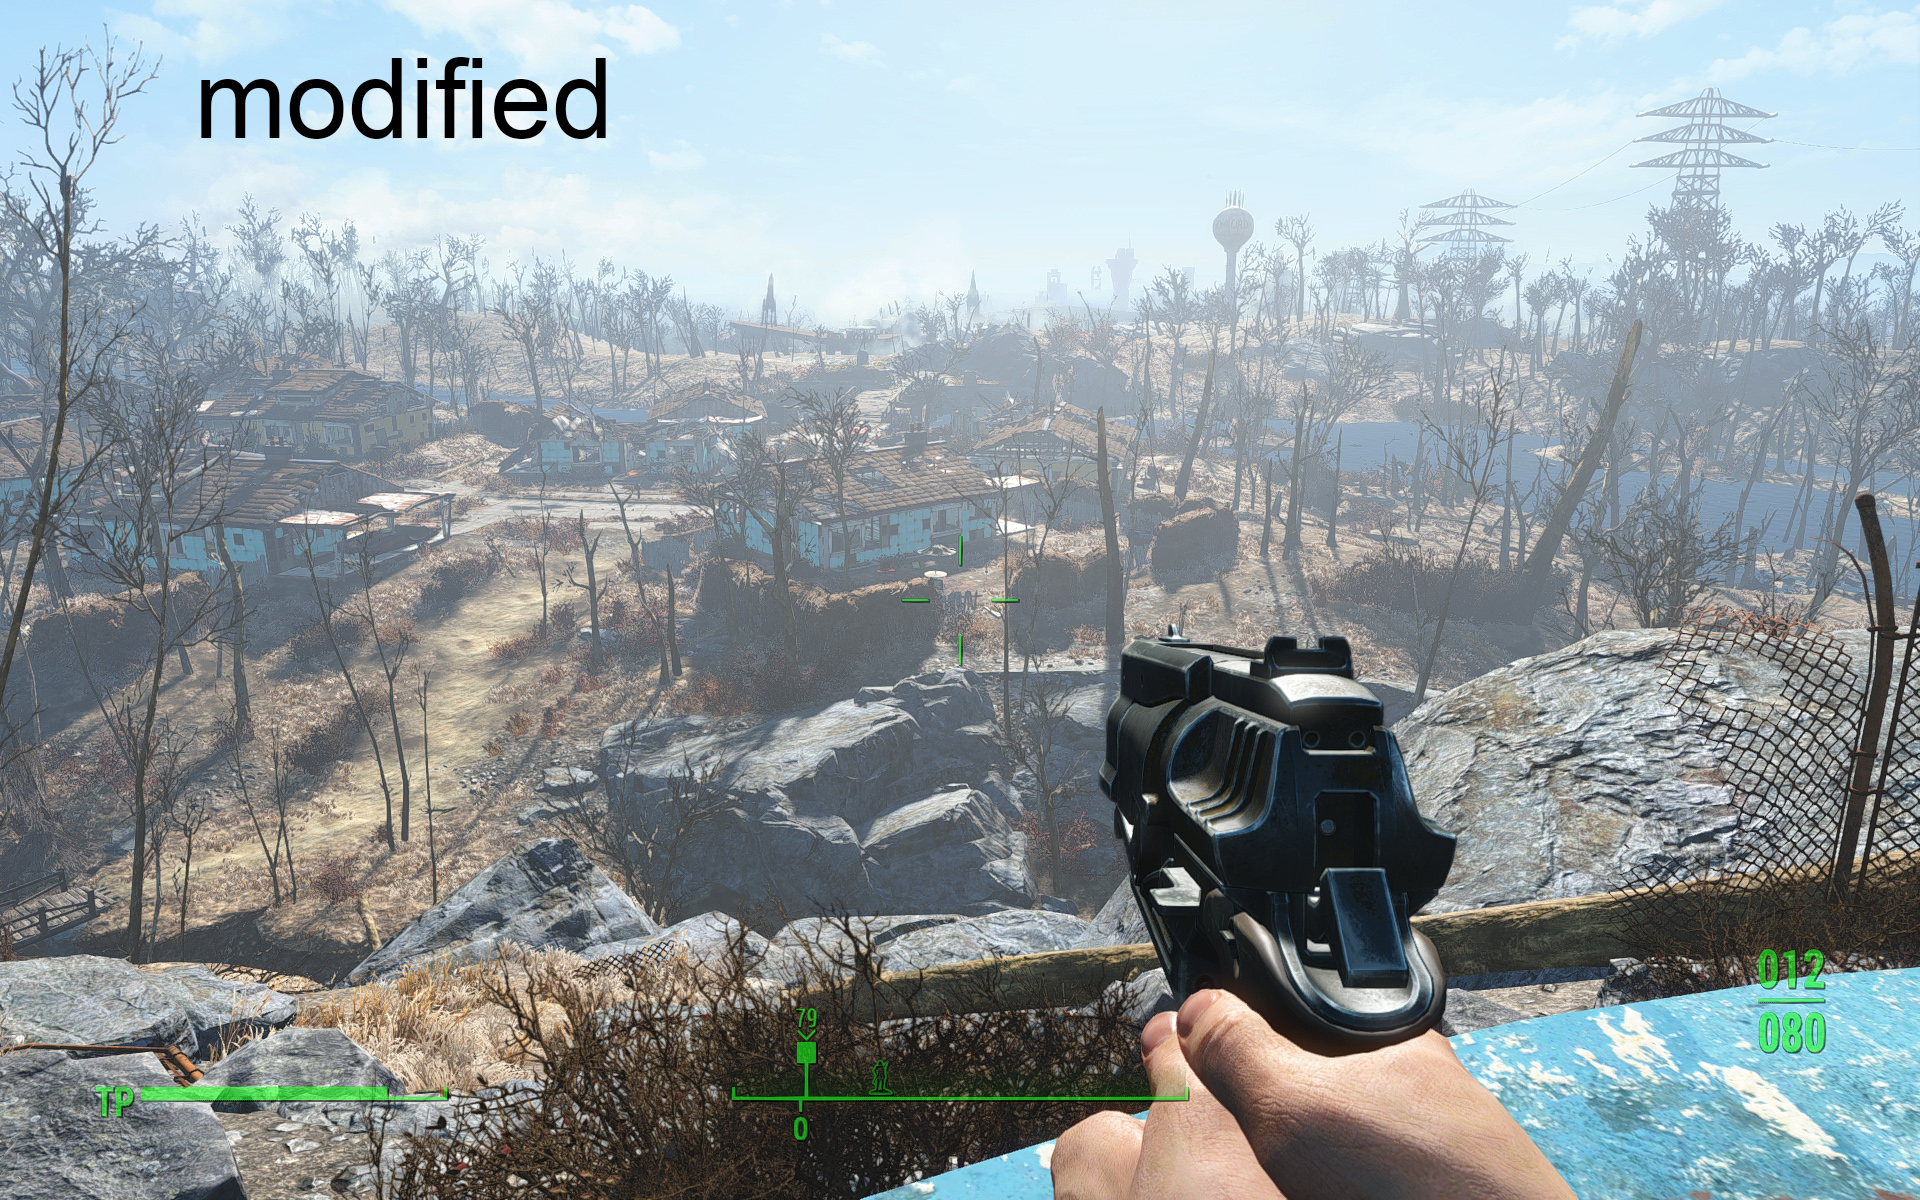 nexus mod manager fallout 4 ini missing